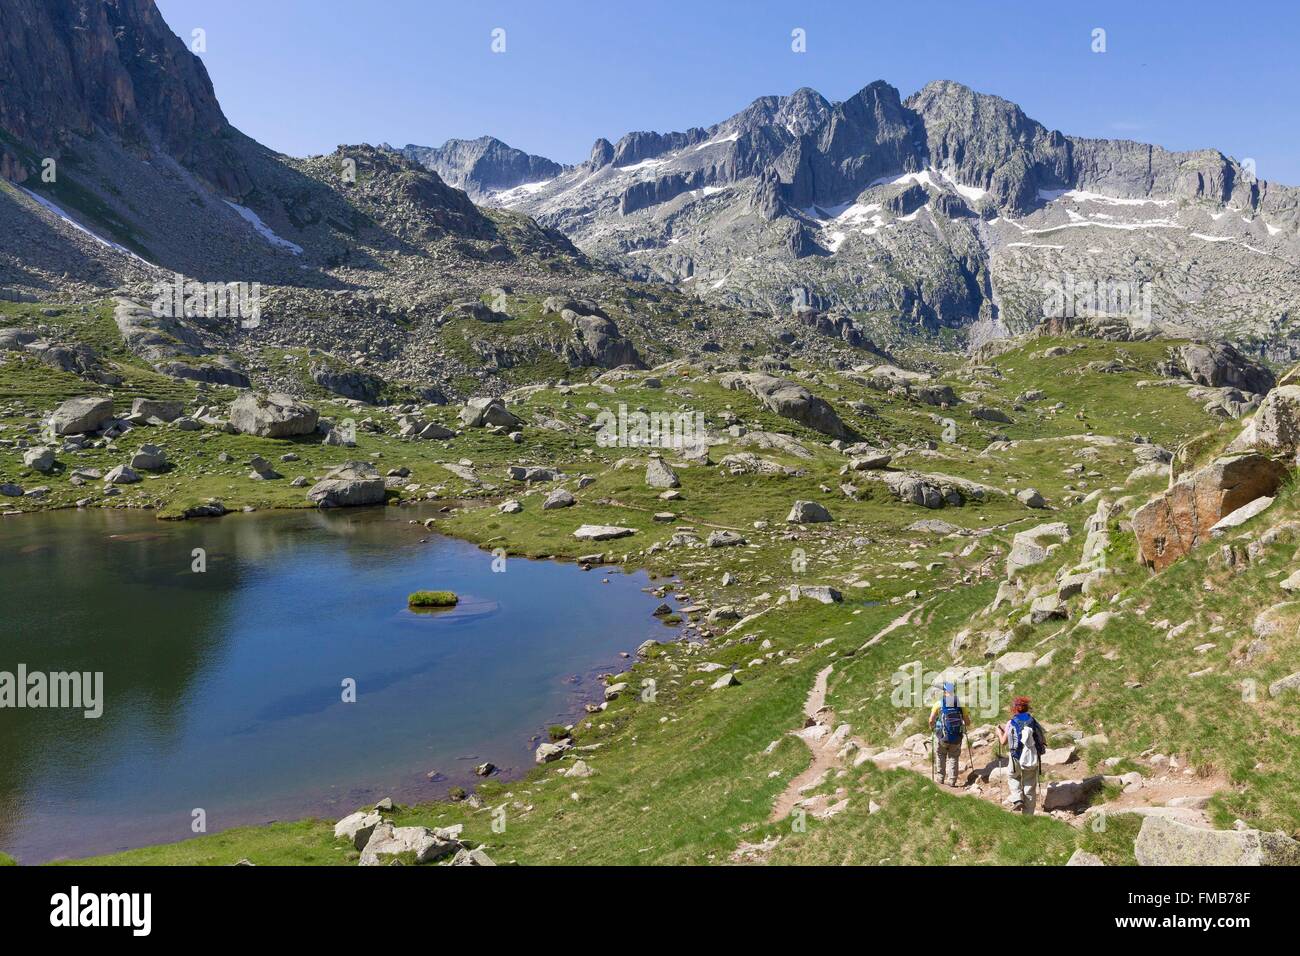 Spain, Catalonia, Val d'Aran, Arties, Aigüestortes i Estany de Sant Maurici National Park, between Monges and Travessani lakes, Stock Photo